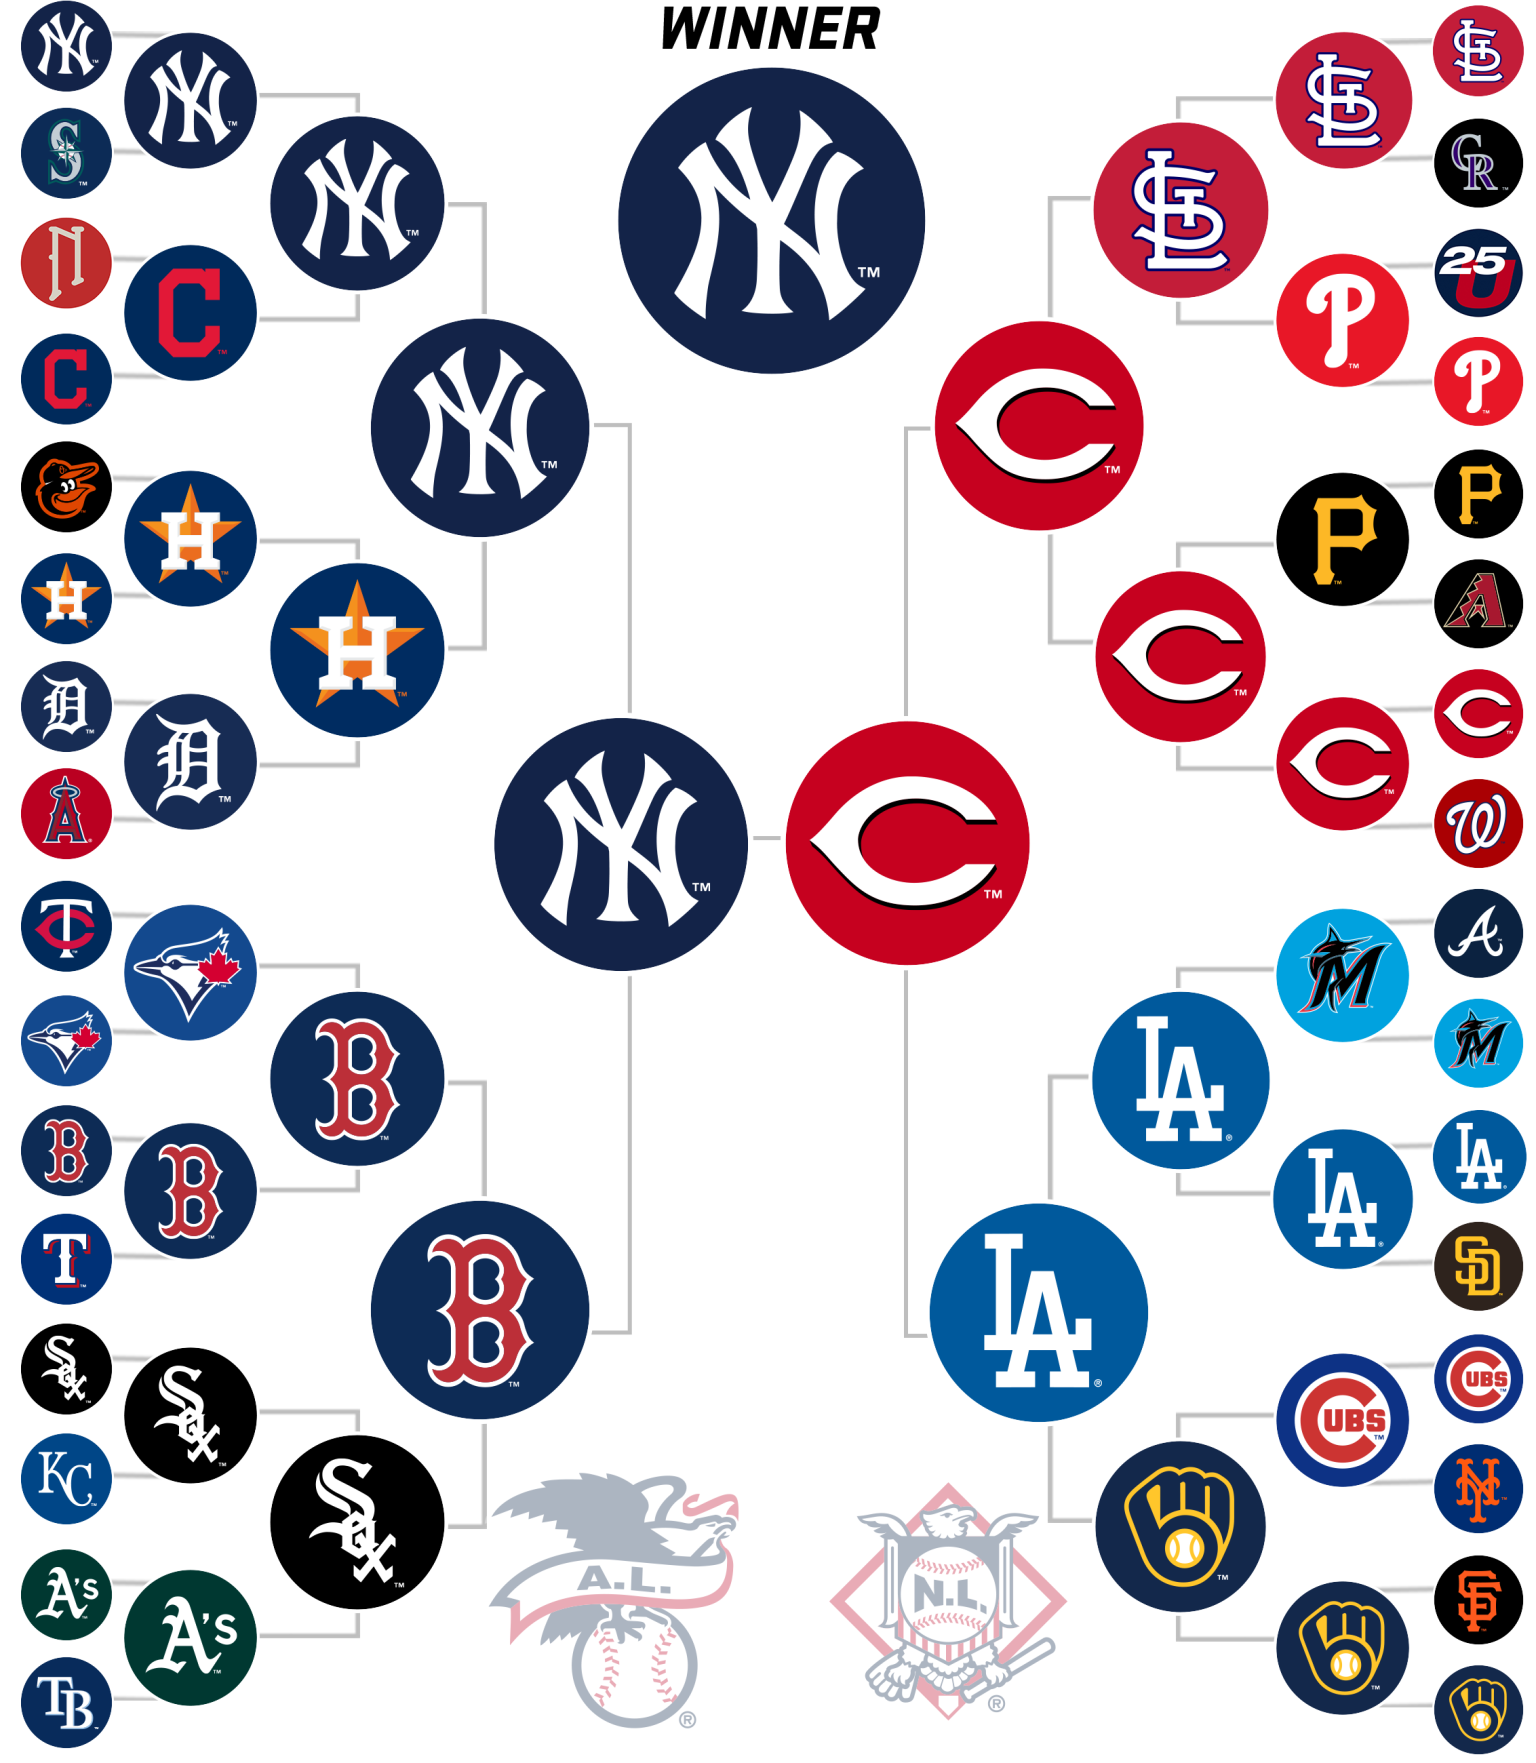 MLB Dream Bracket, presented by DraftKings, Dream Rosters